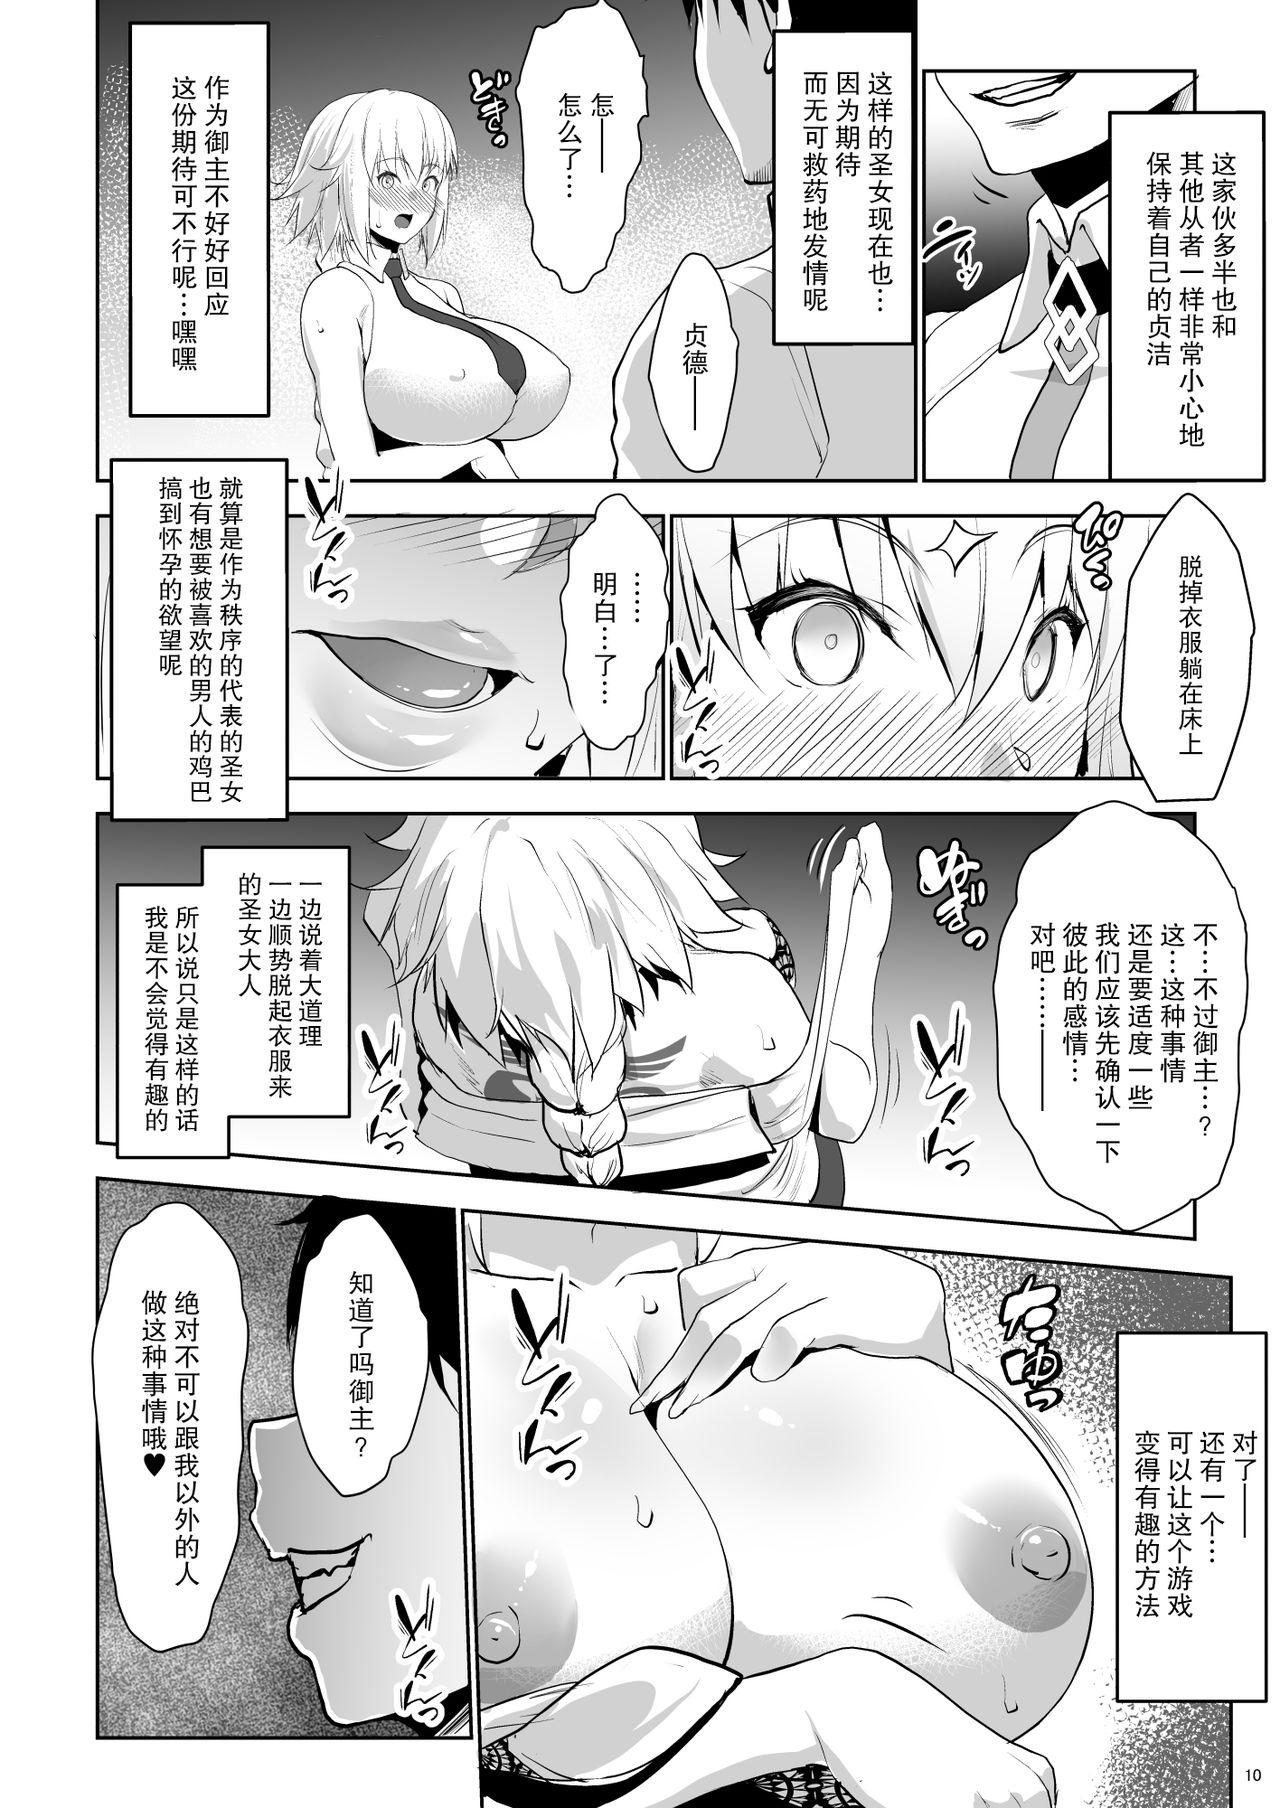 Moaning Sapohame Jeanne - Fate grand order Glasses - Page 10